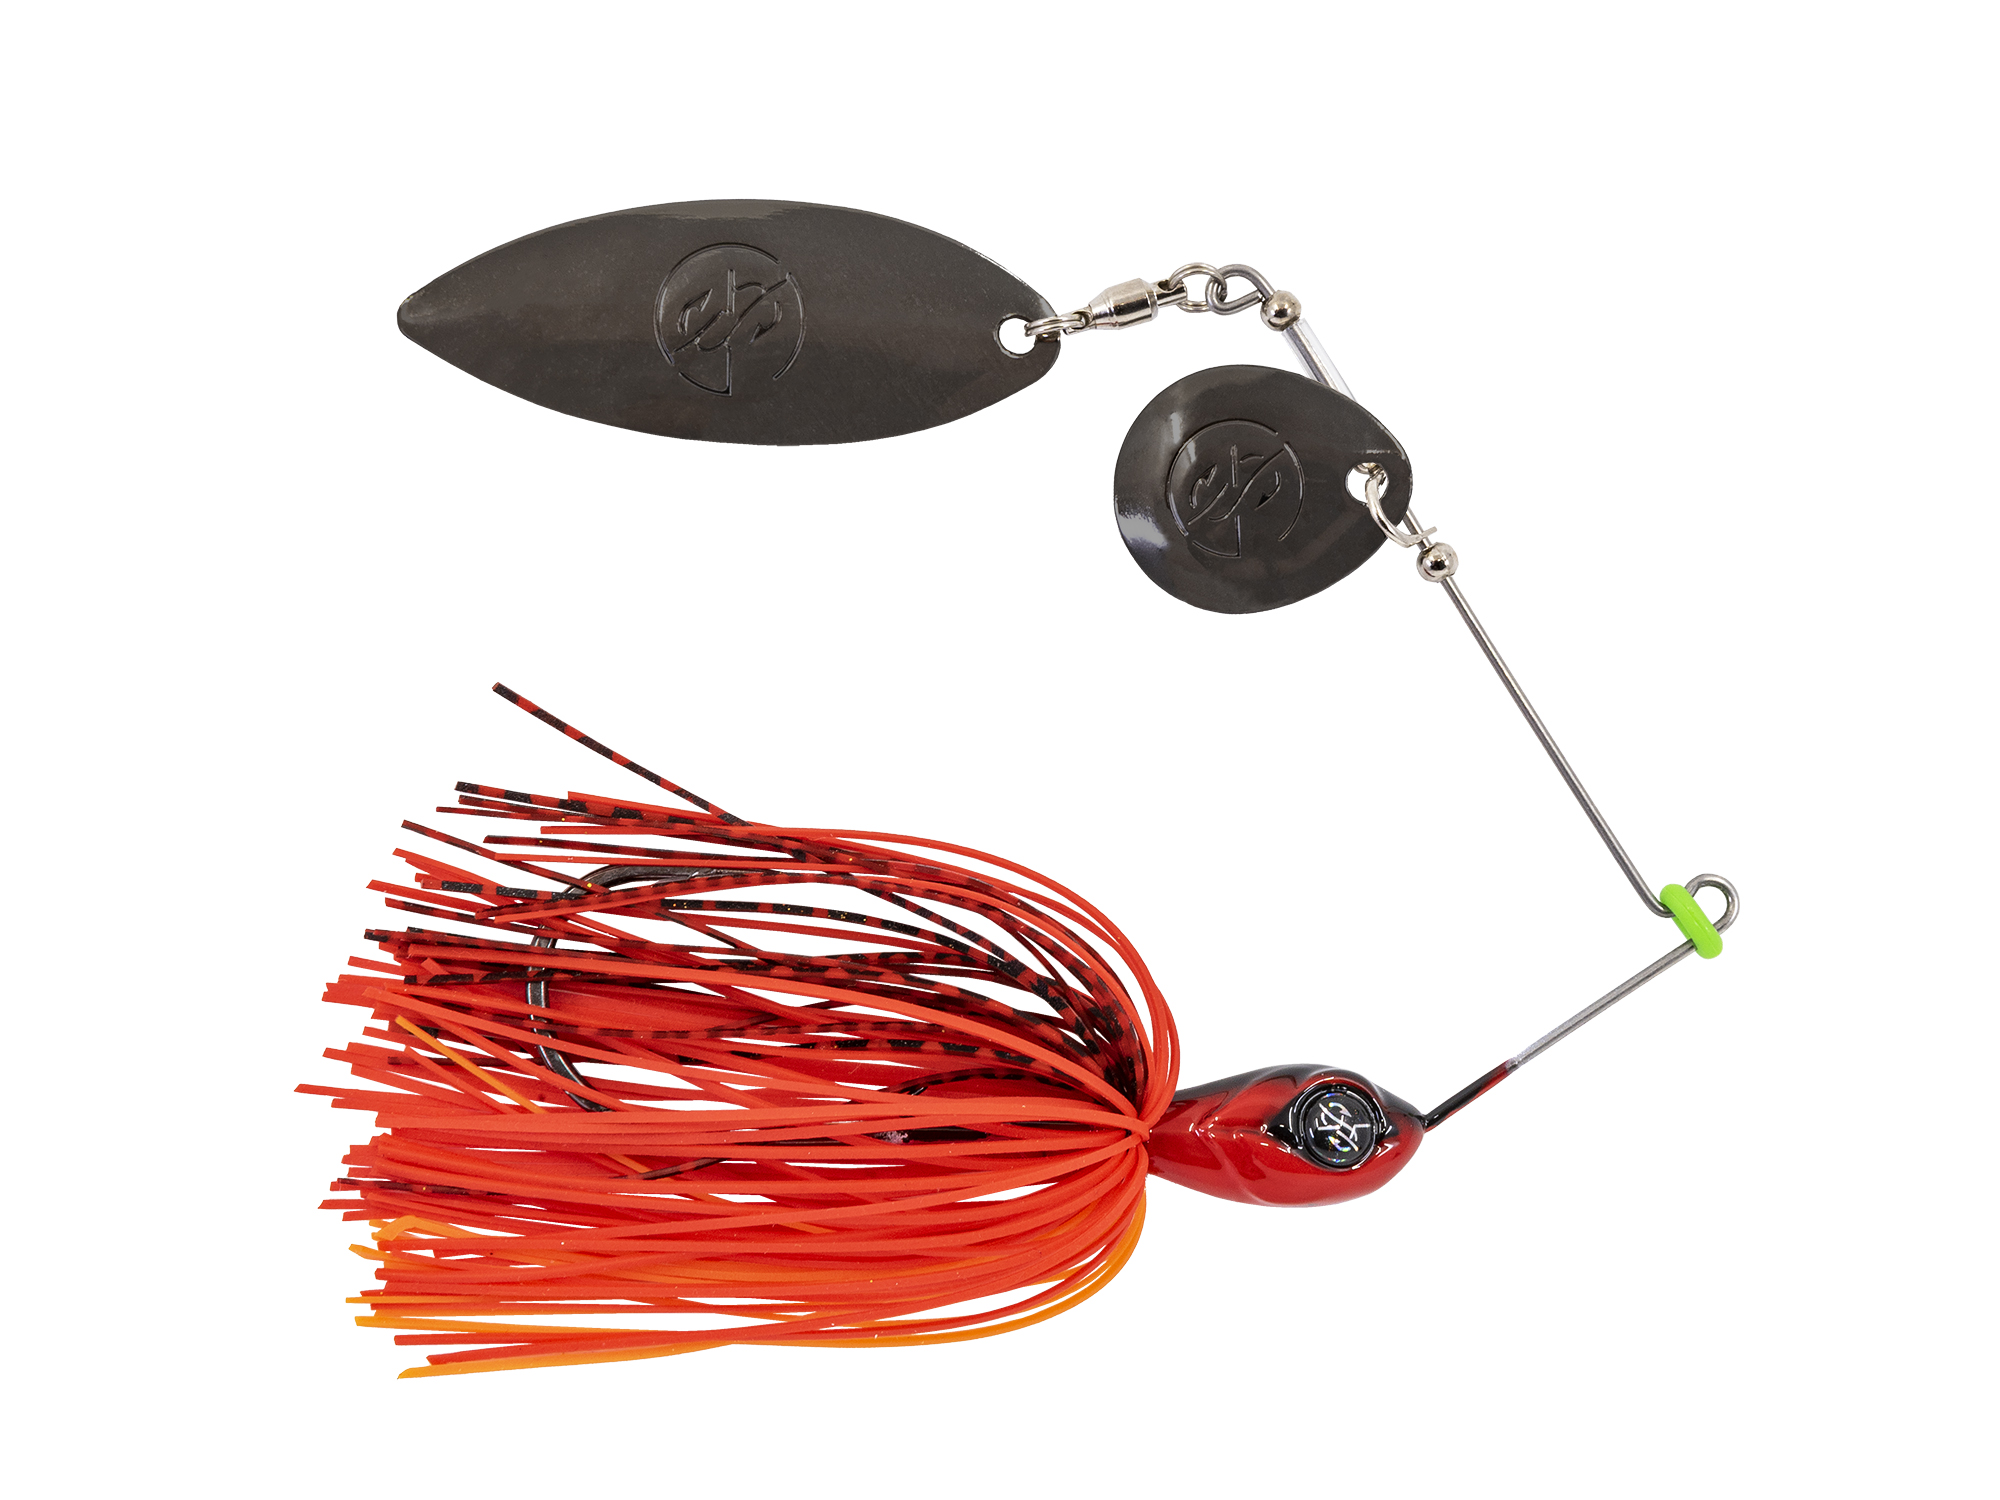 Mystery Tackle Box - The GooganSquad Blooper and Hound are the new topwater  additions to the lineup of Googan Squad x Catch Co collab of hardbaits.  Available at Karl's Bait & Tackle !